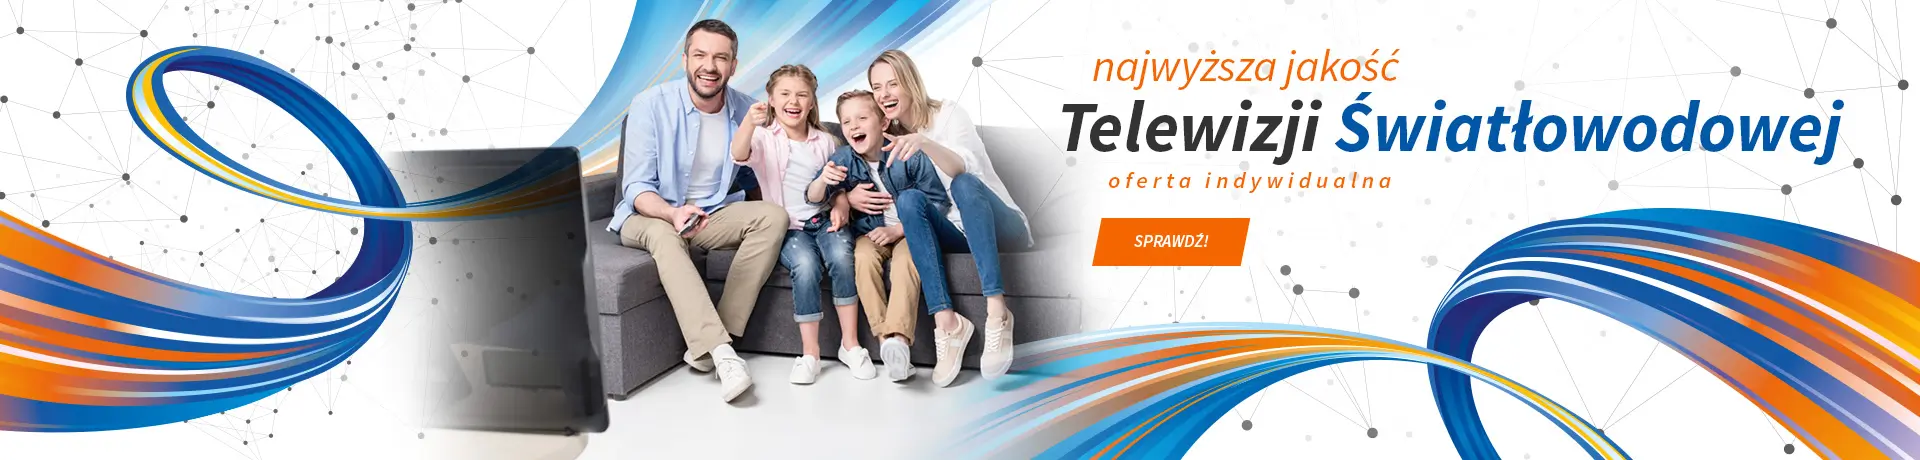 Main page banner featuring a smiling family seated on a couch, cheerfully pointing at a screen, next to text 'najwyższa jakość Telewizji Światłowodowej - oferta indywidualna' with a 'SPRAWDŹ!' call-to-action button. The background includes abstract blue and orange lines representing high-speed fiber-optic technology.